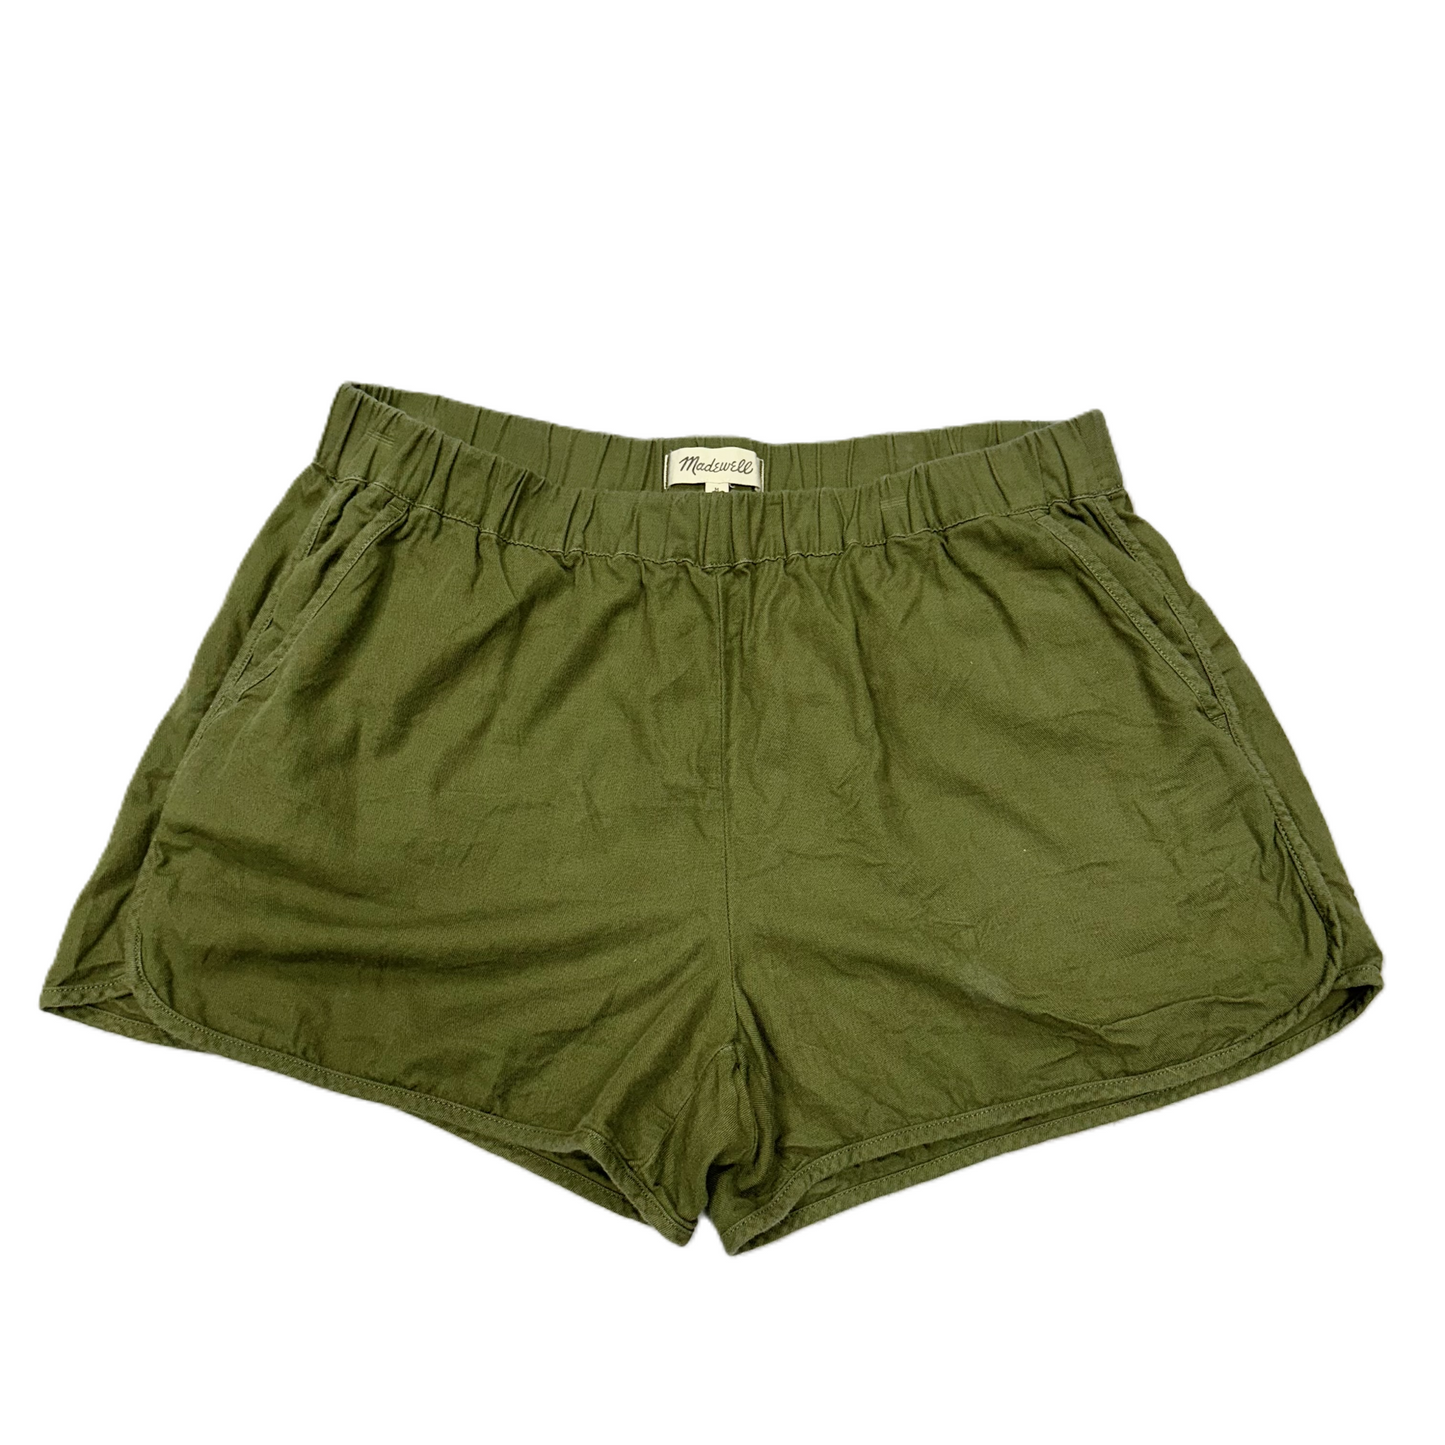 Green Shorts By Madewell, Size: M